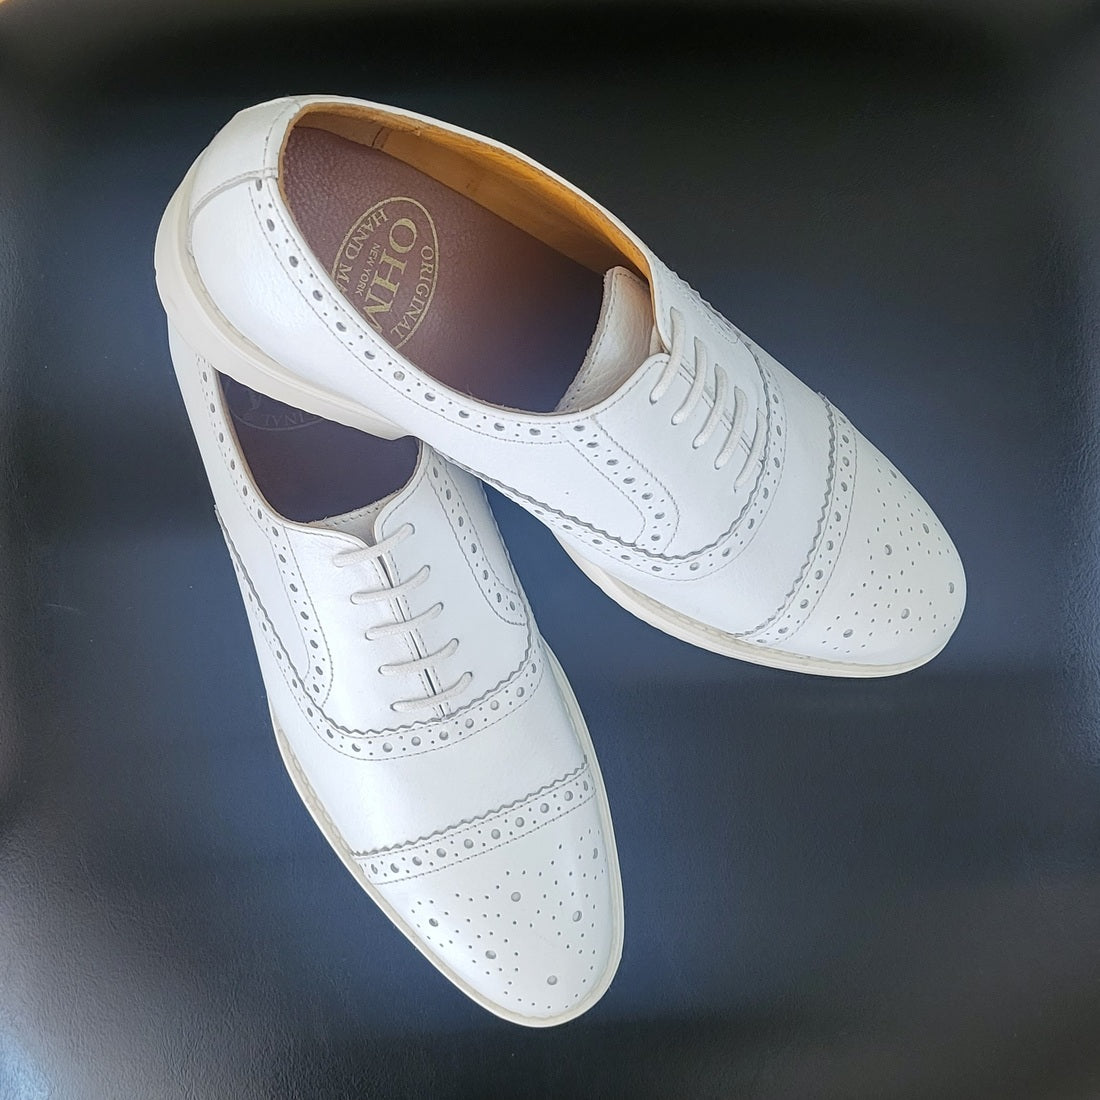 OHM New York Cap Toe Oxford Perforated Brogue Executive Leather Shoes White